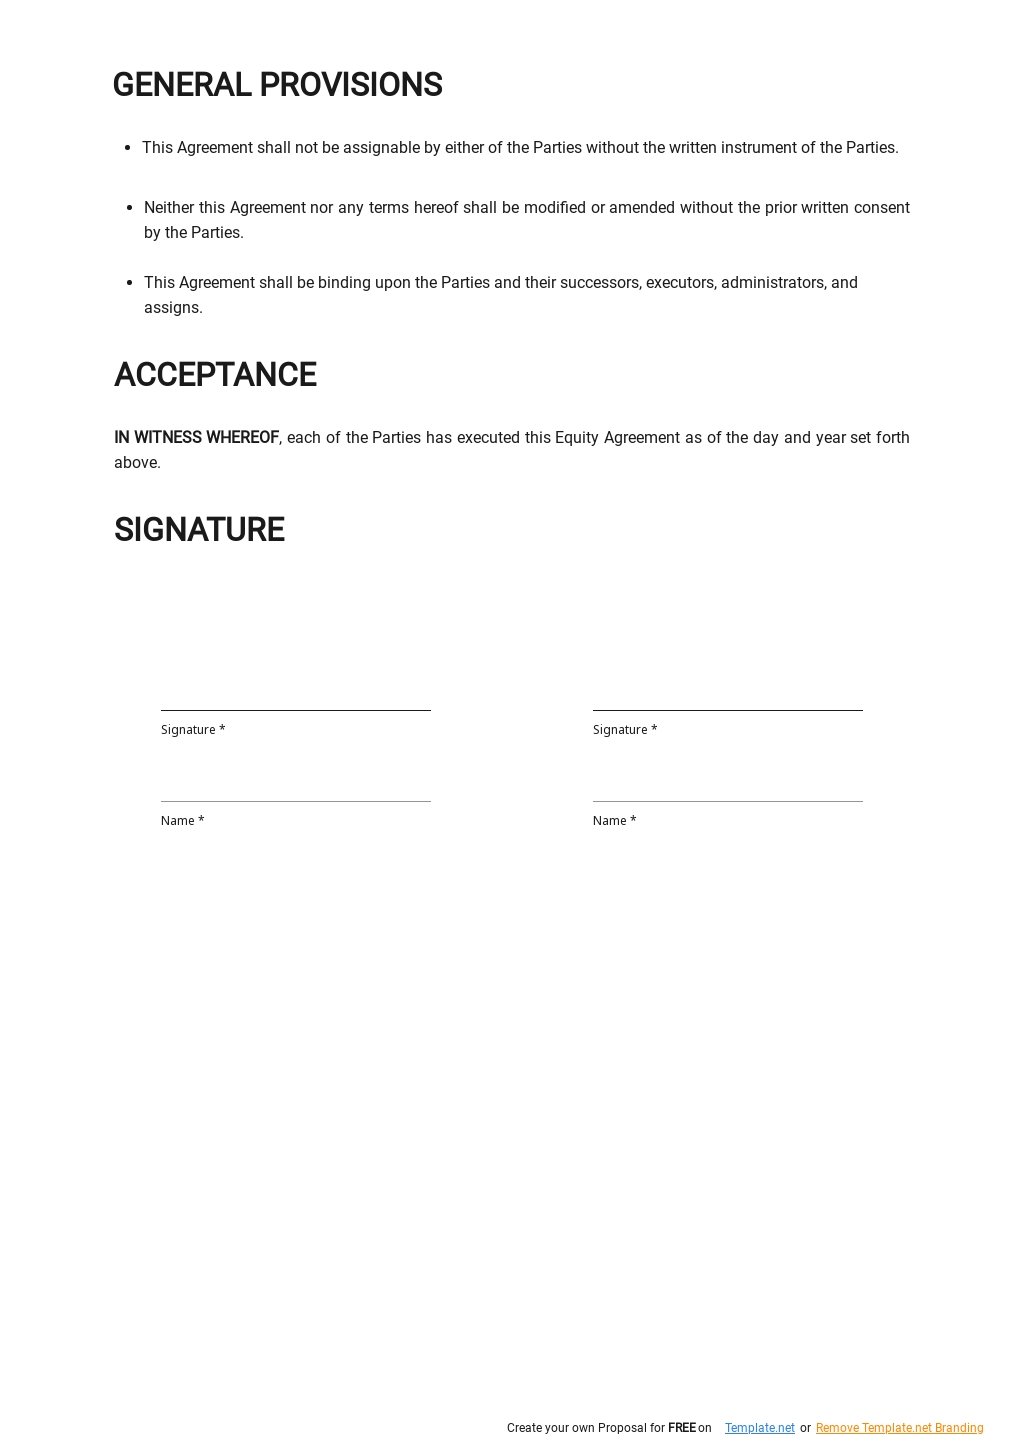 Equity Agreement Template Google Docs, Word, Apple Pages